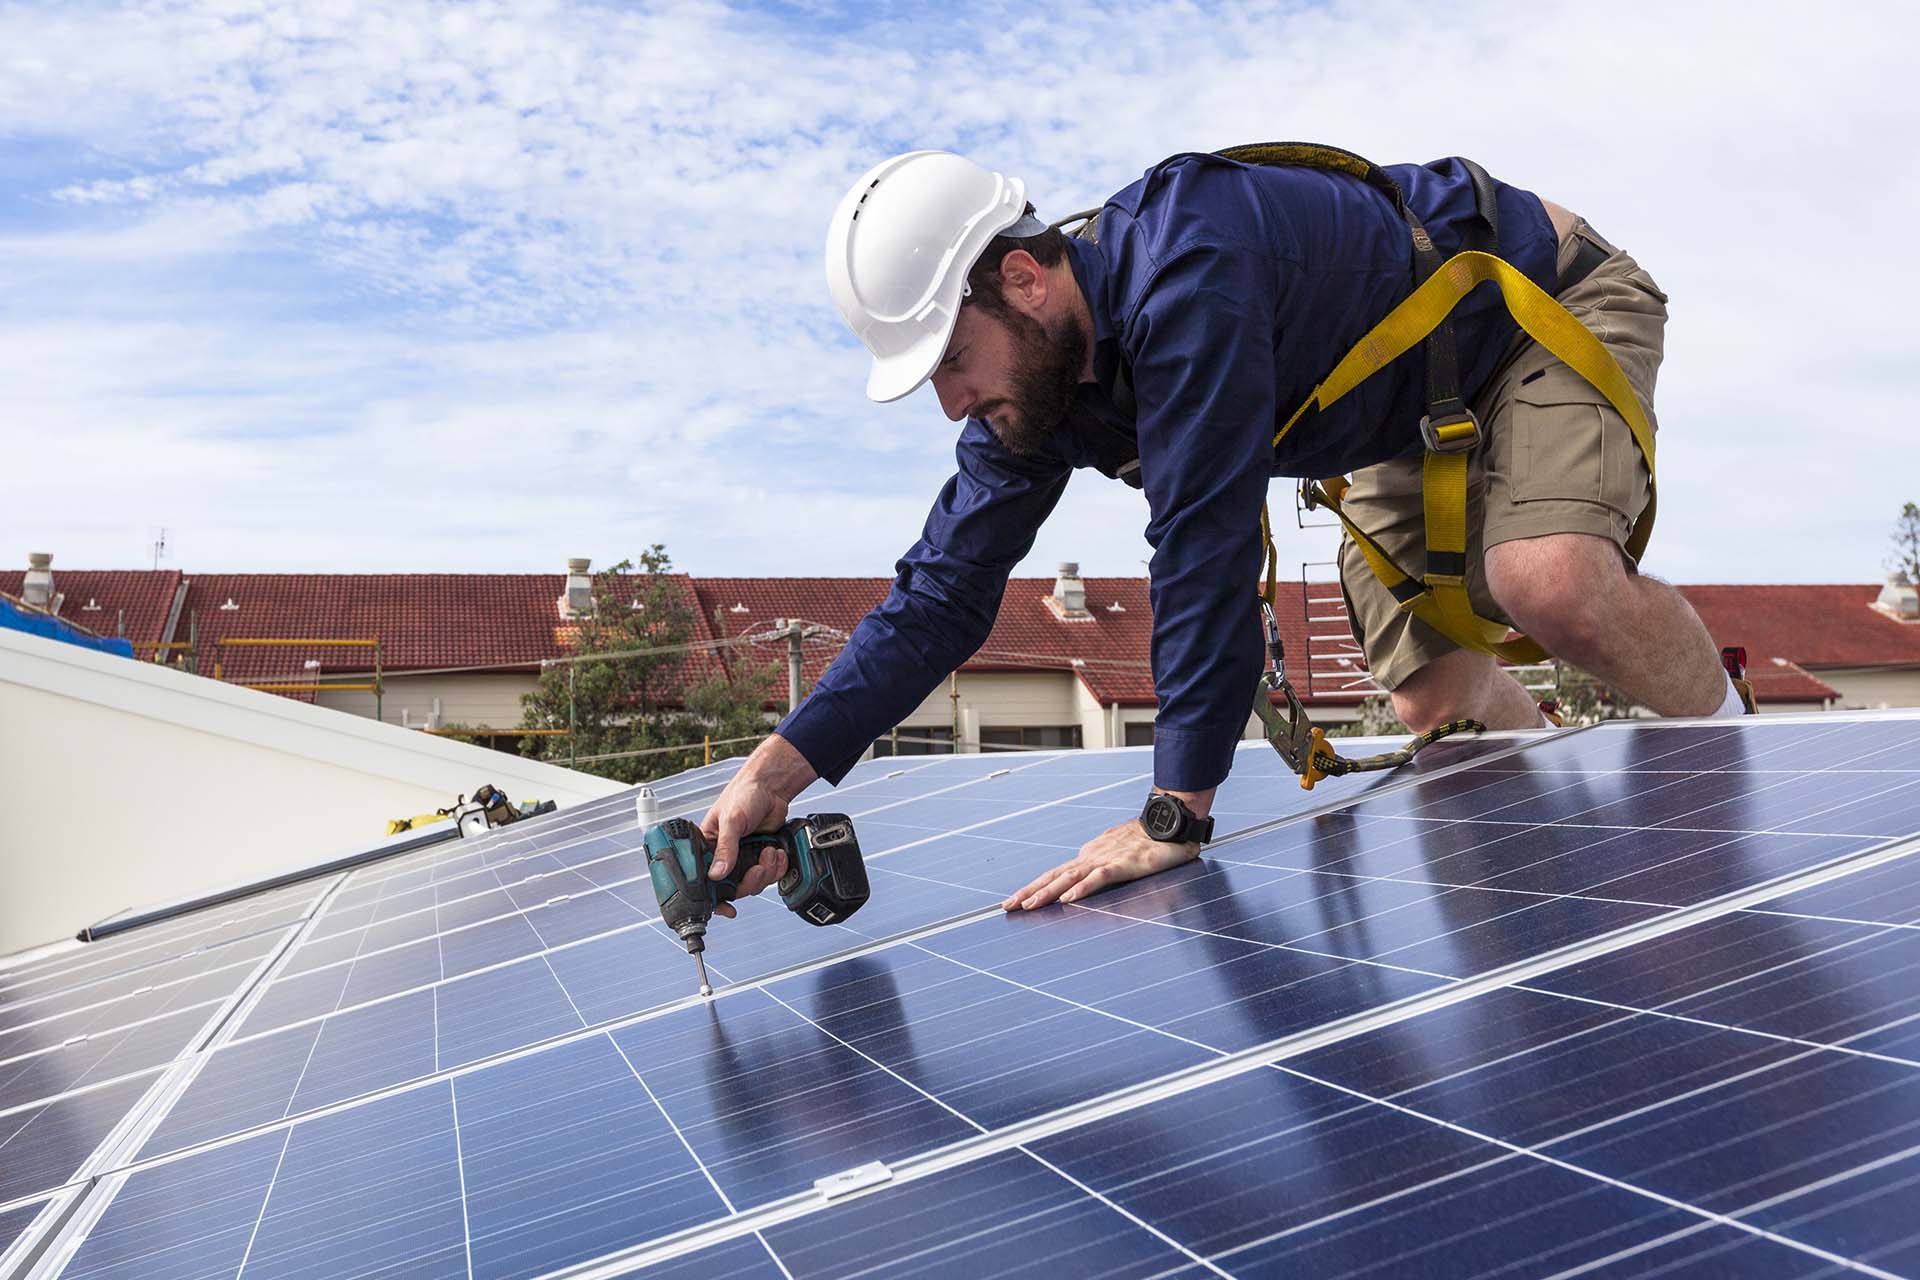 How to start a solar panel business